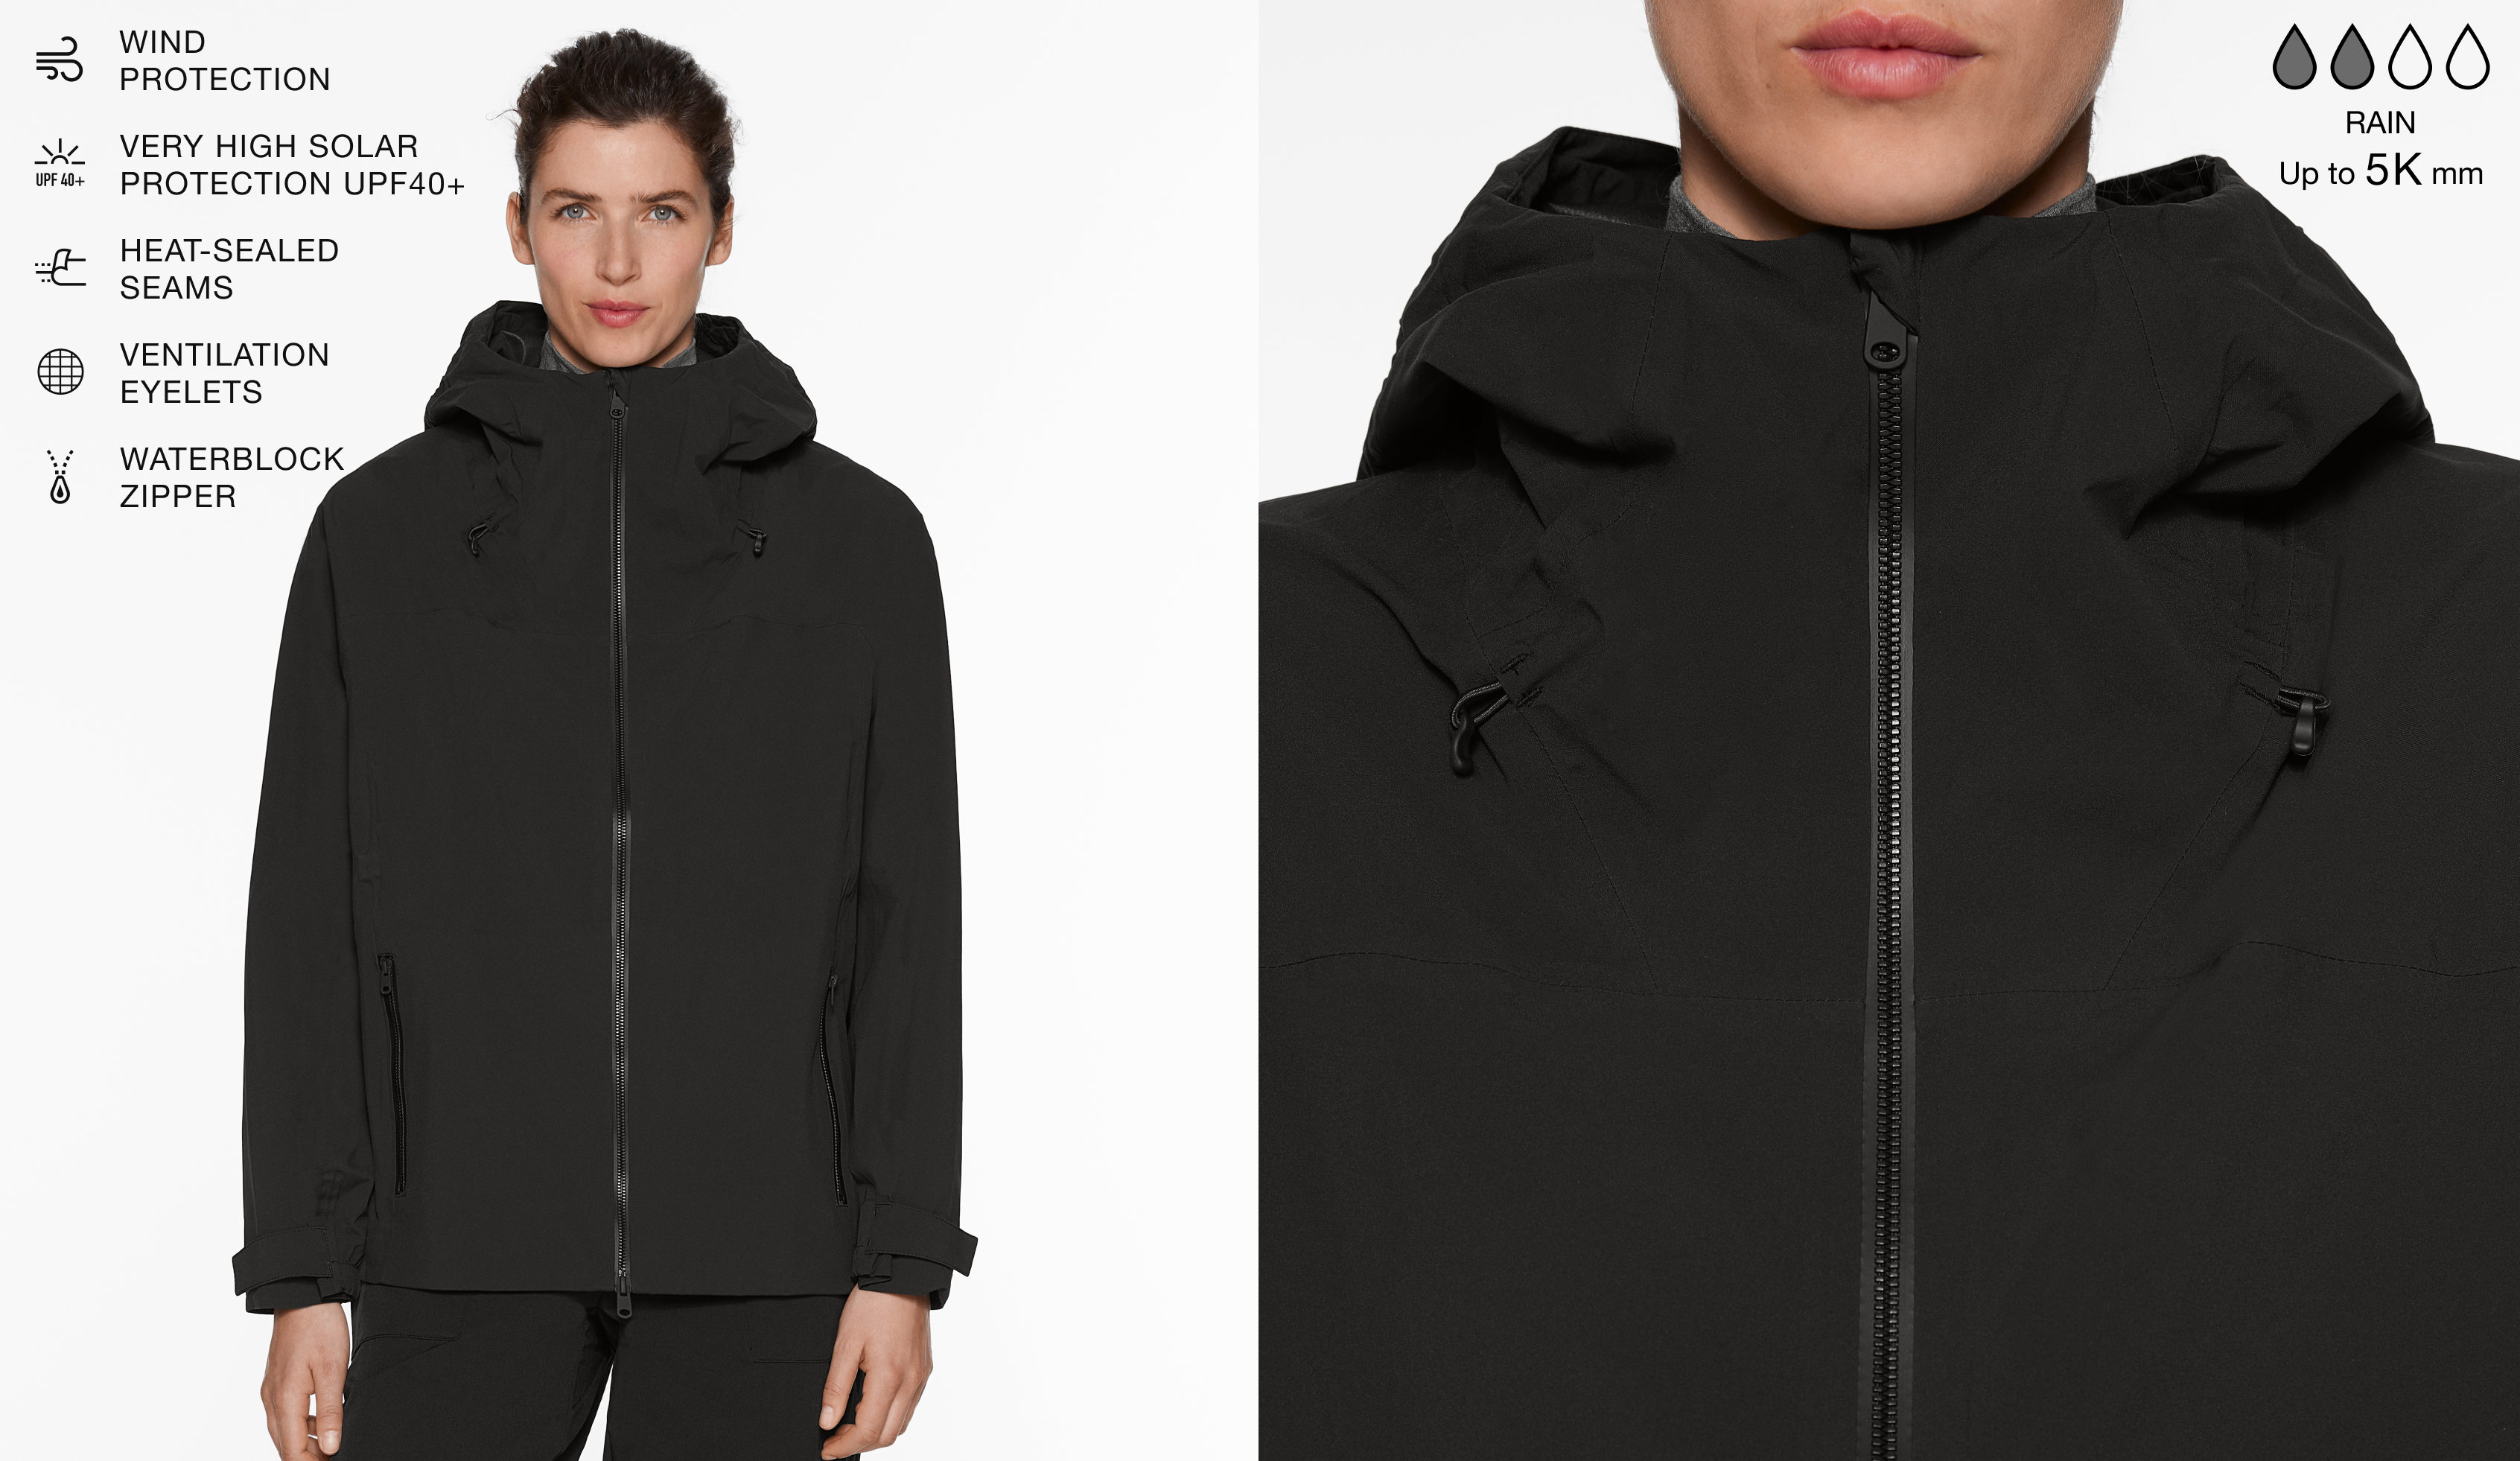 5k water-resistant shell jacket